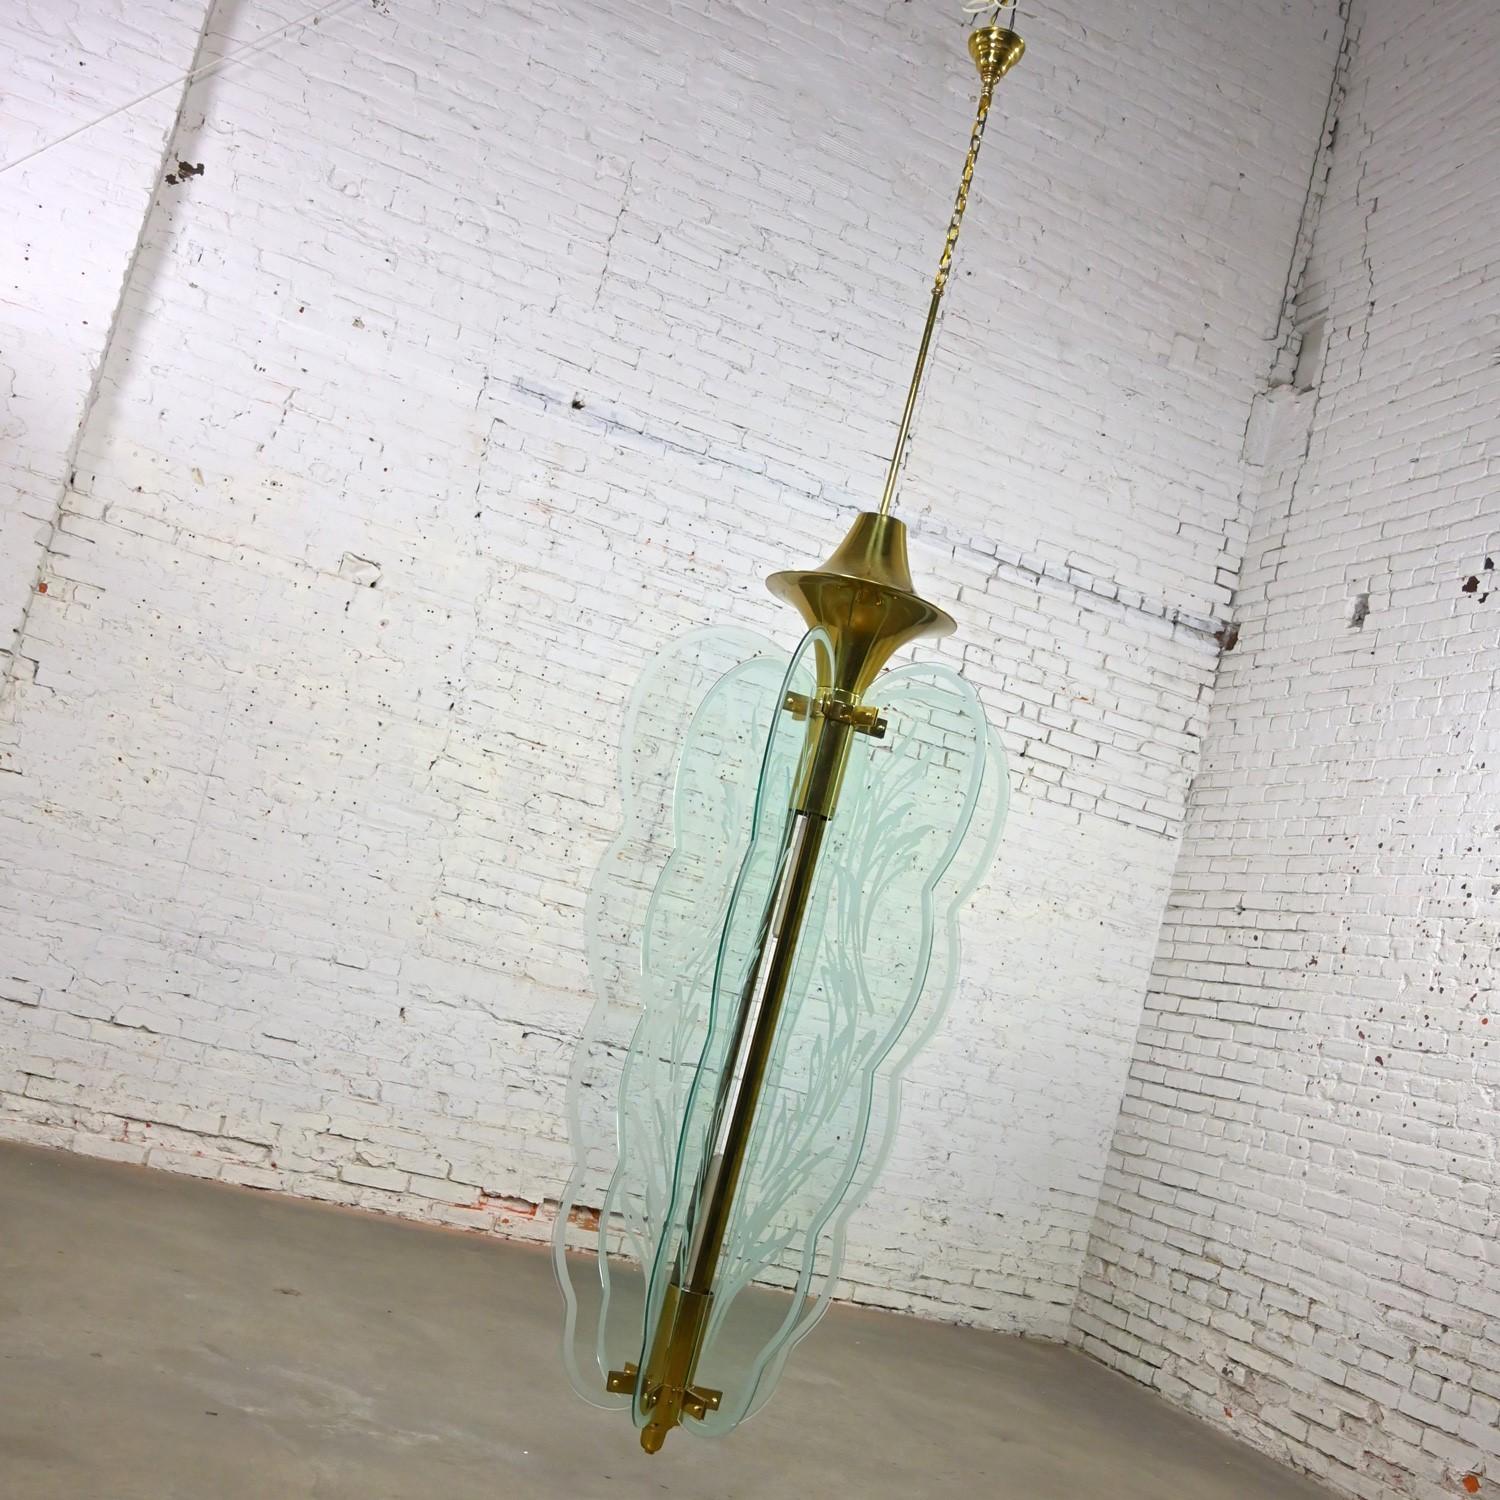 Art Deco Revival Monumental Brass Etched Glass Hanging Light Fixture Chandelier In Good Condition For Sale In Topeka, KS